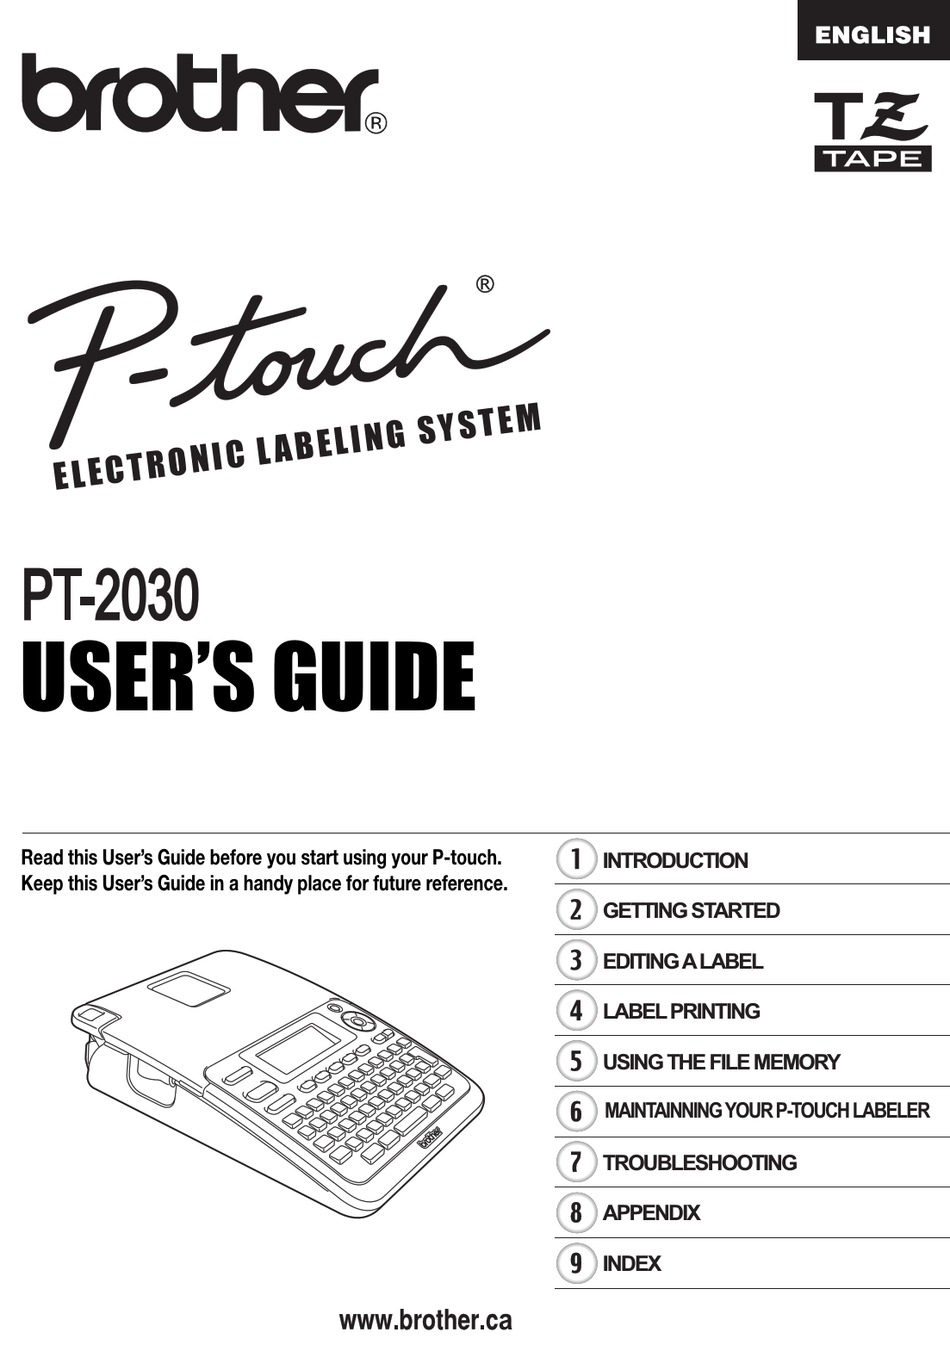 BROTHER P-TOUCH PT-2030 USER MANUAL Pdf Download | ManualsLib